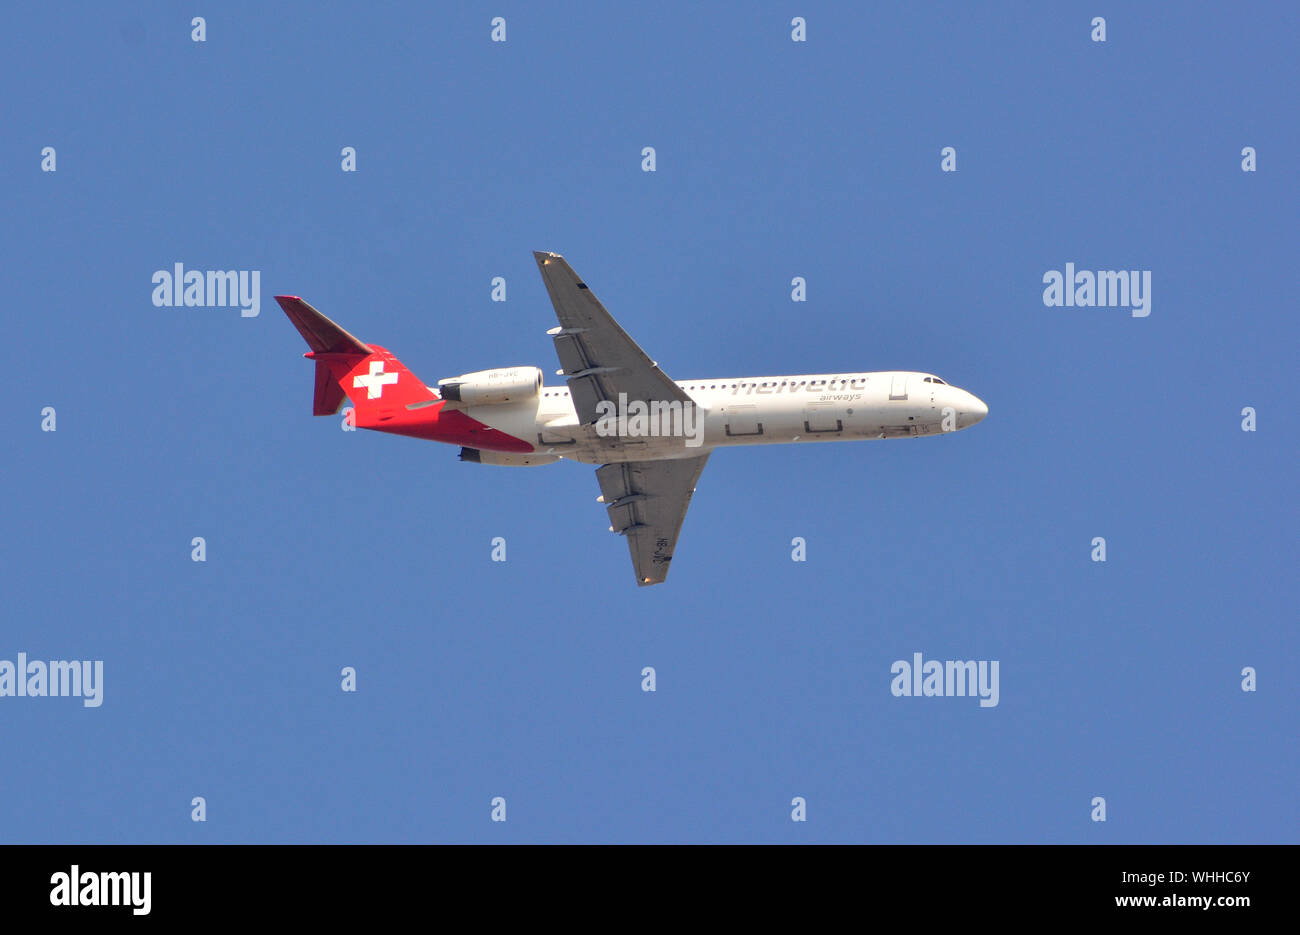 Airlines Flugzeug High Resolution Stock Photography and Images - Alamy